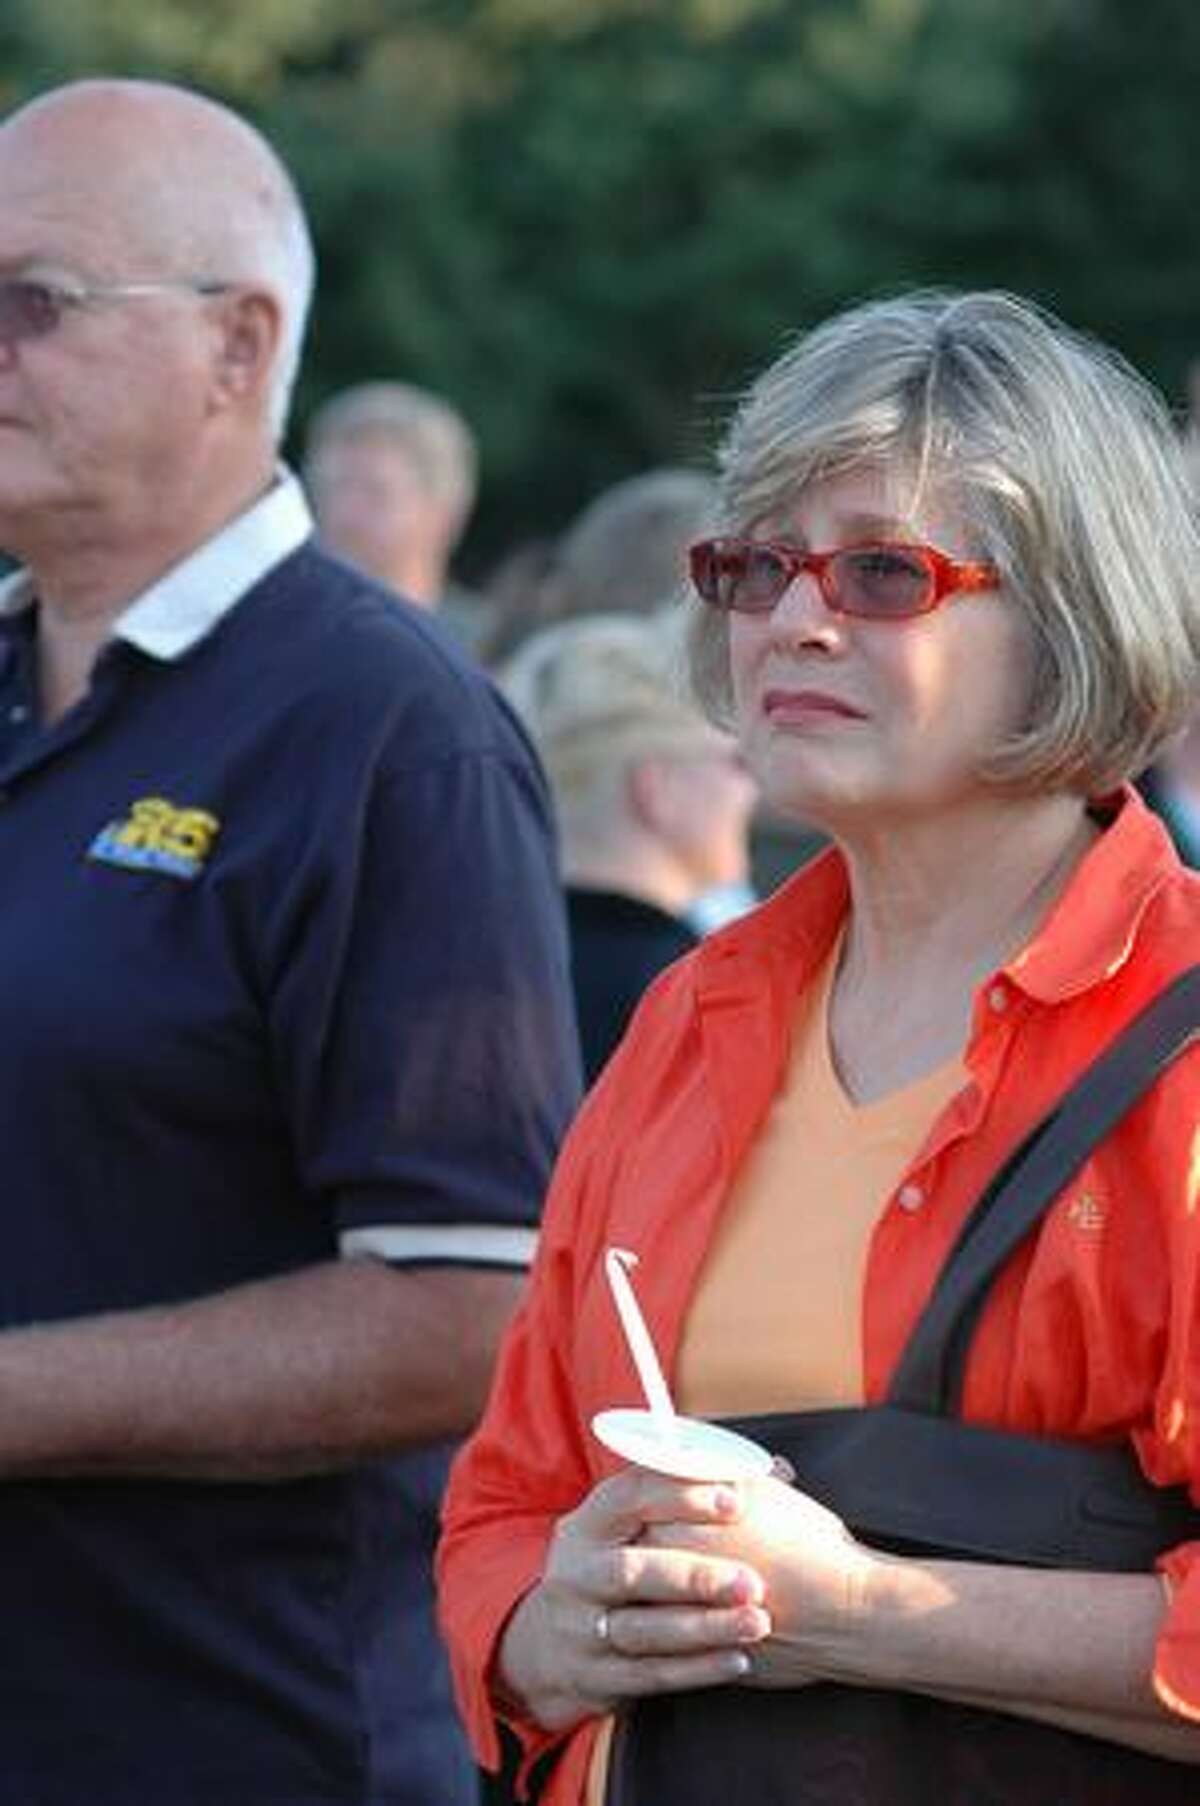 Elizabeth Graham, right, and Bob Cronn watch the start of a candle light vigil for the victim of a stabbing early last week at the South Park Community Center in south Seattle Thursday July 23, 2009. Said Graham, "I am here because this is a tragedy." Photo by Daniel Berman/SeattlePI.com